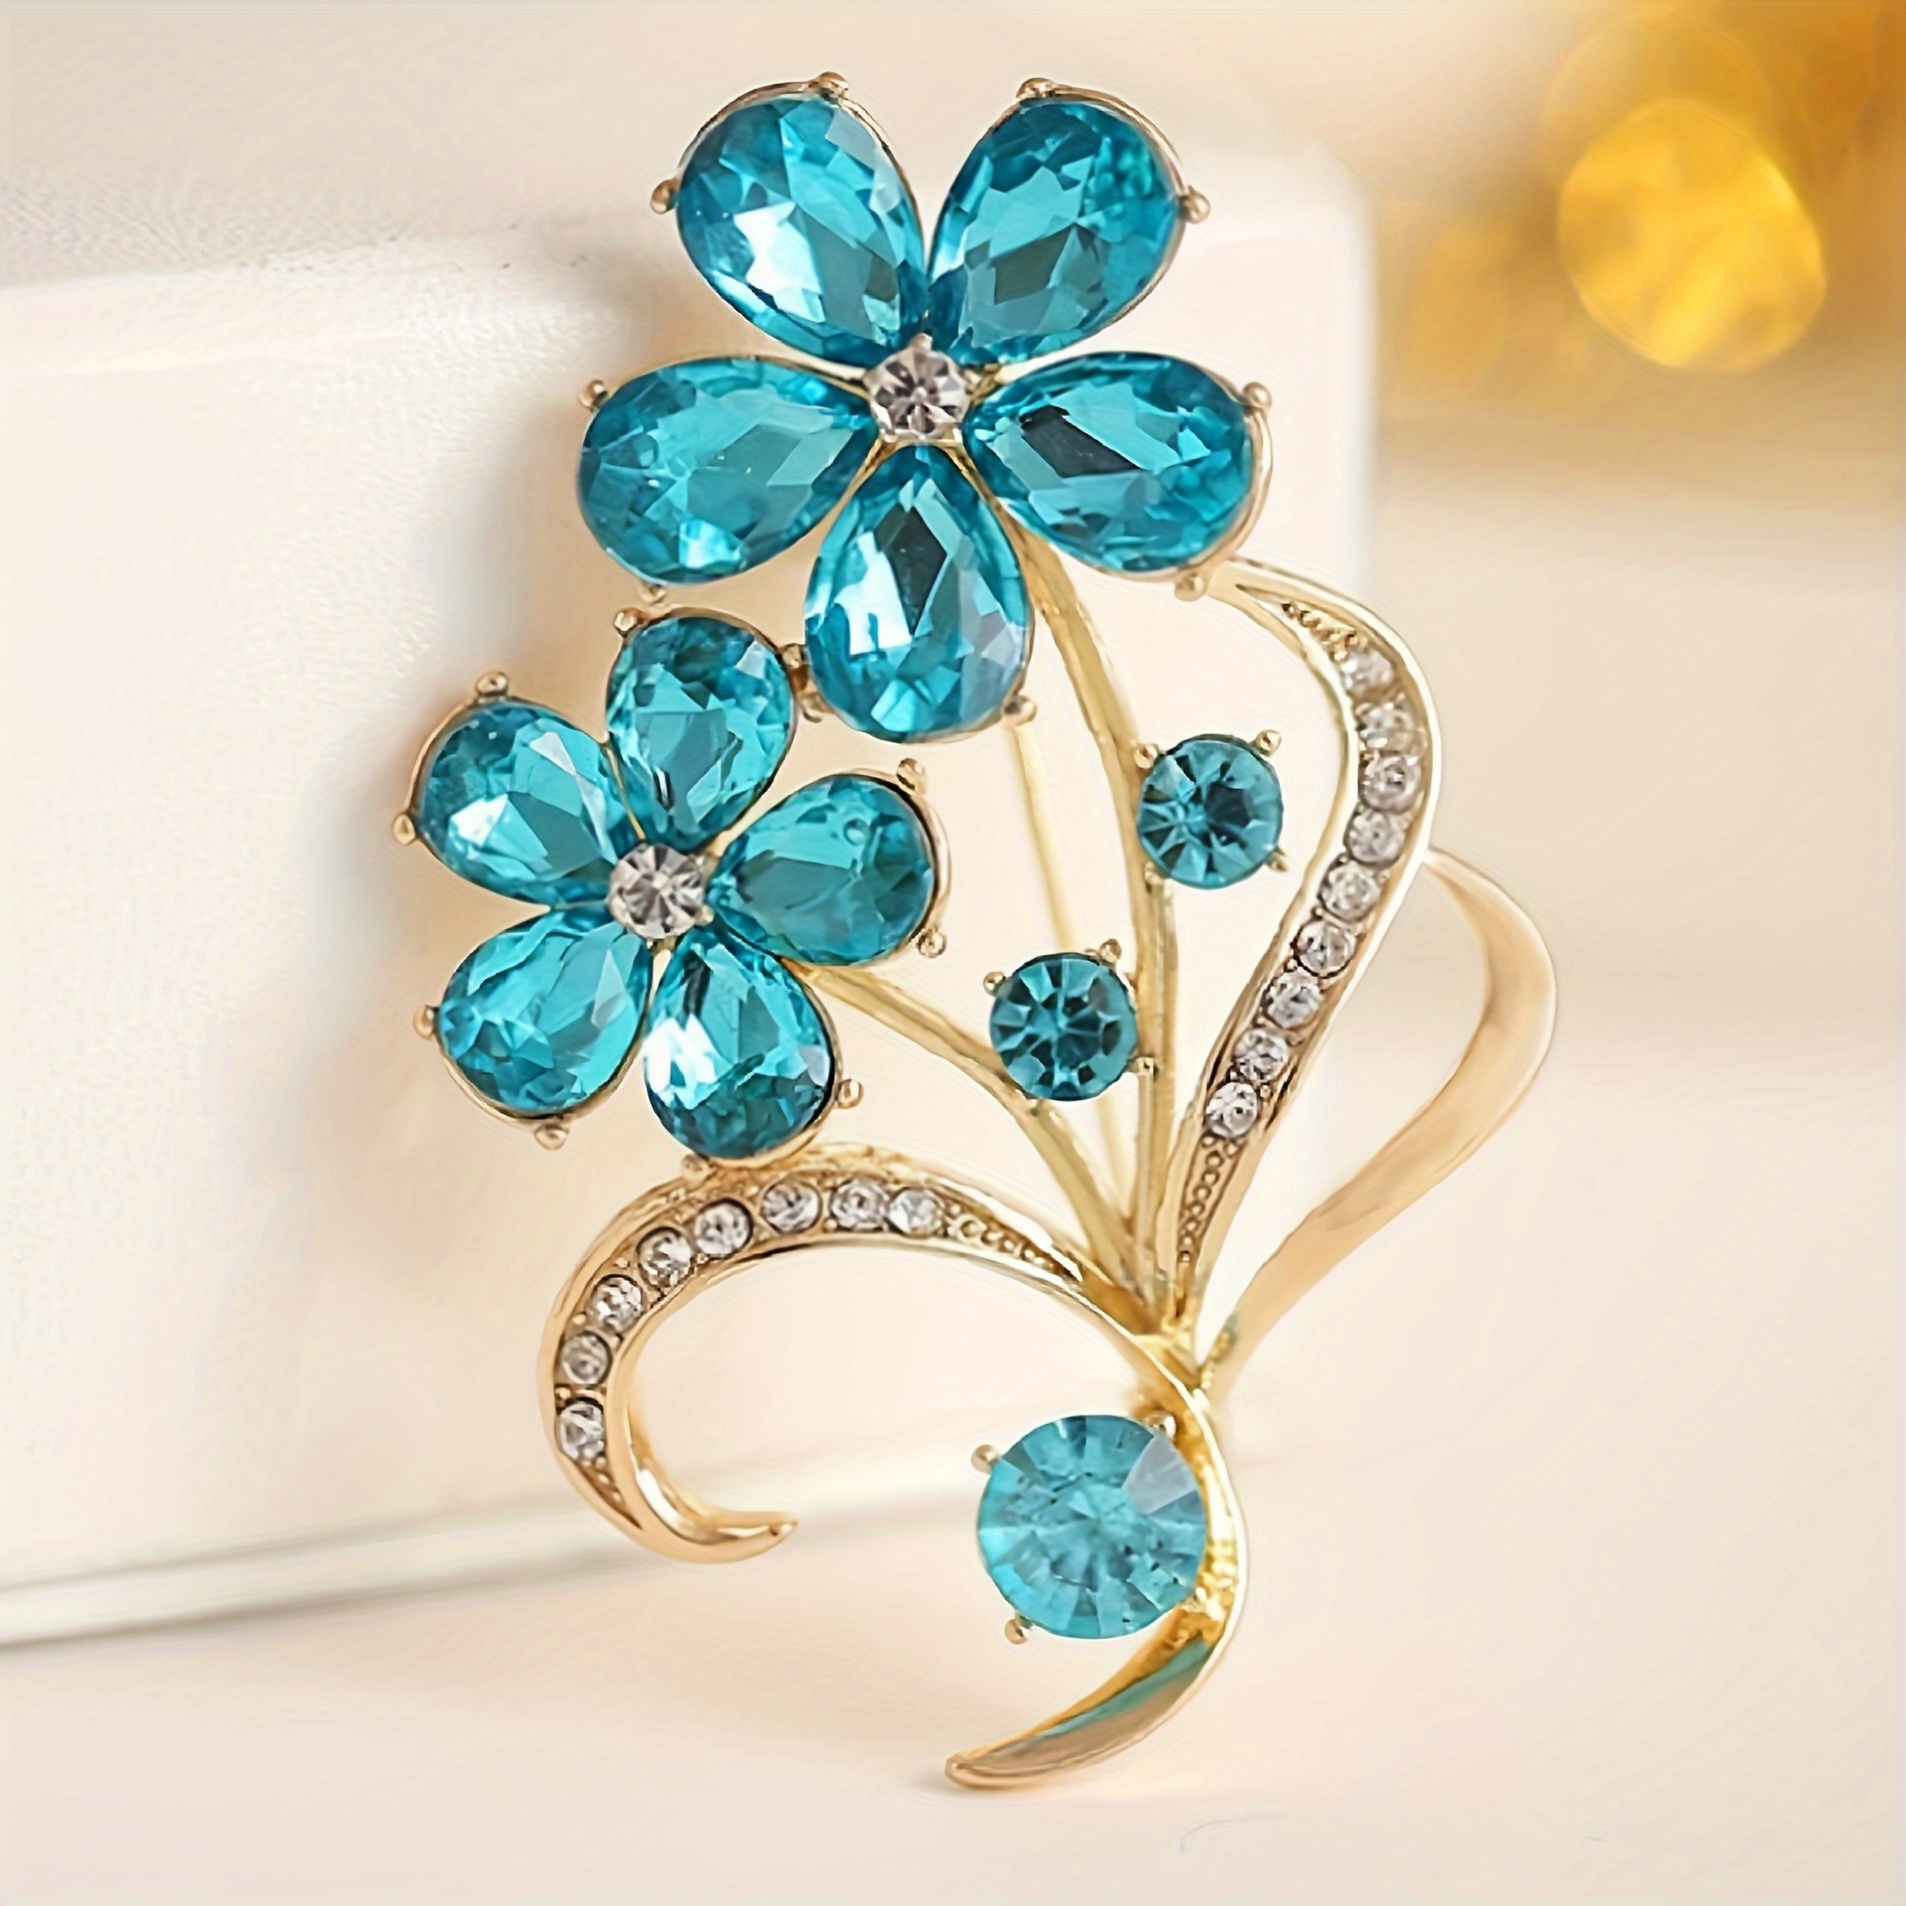 1pc Women's Crystal & Rhinestone Brooch Pin Suitable For Daily